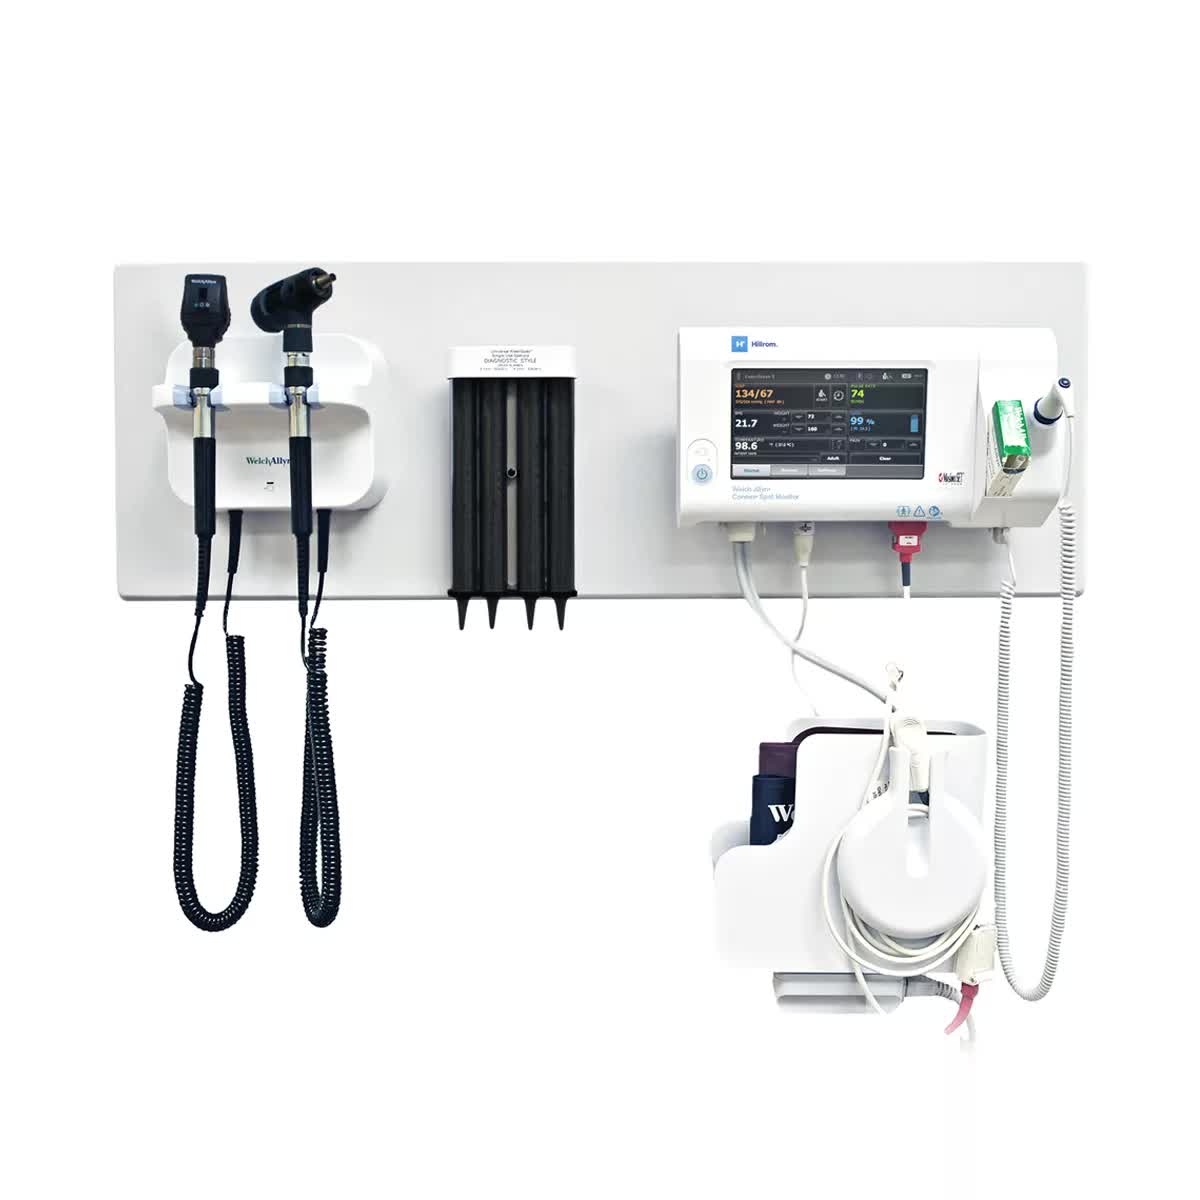 Welch Allyn Connex 7300 Bluetooth Connectivity Spot Monitor with Nonin SpO2 and Braun Pro6000